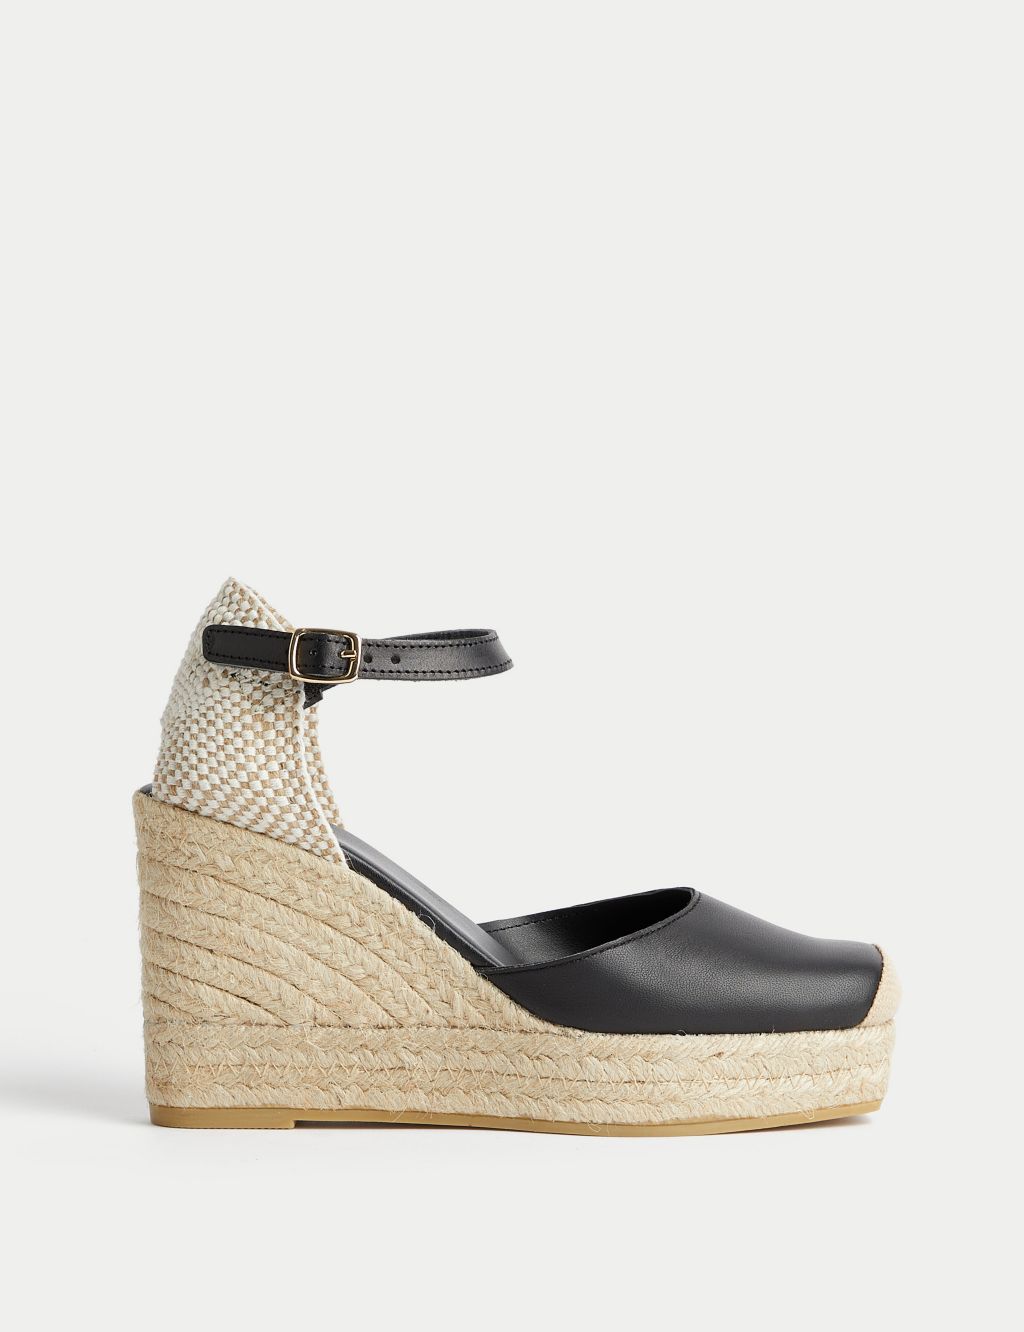 Closed Toe Ankle Strap Wedge Espadrilles